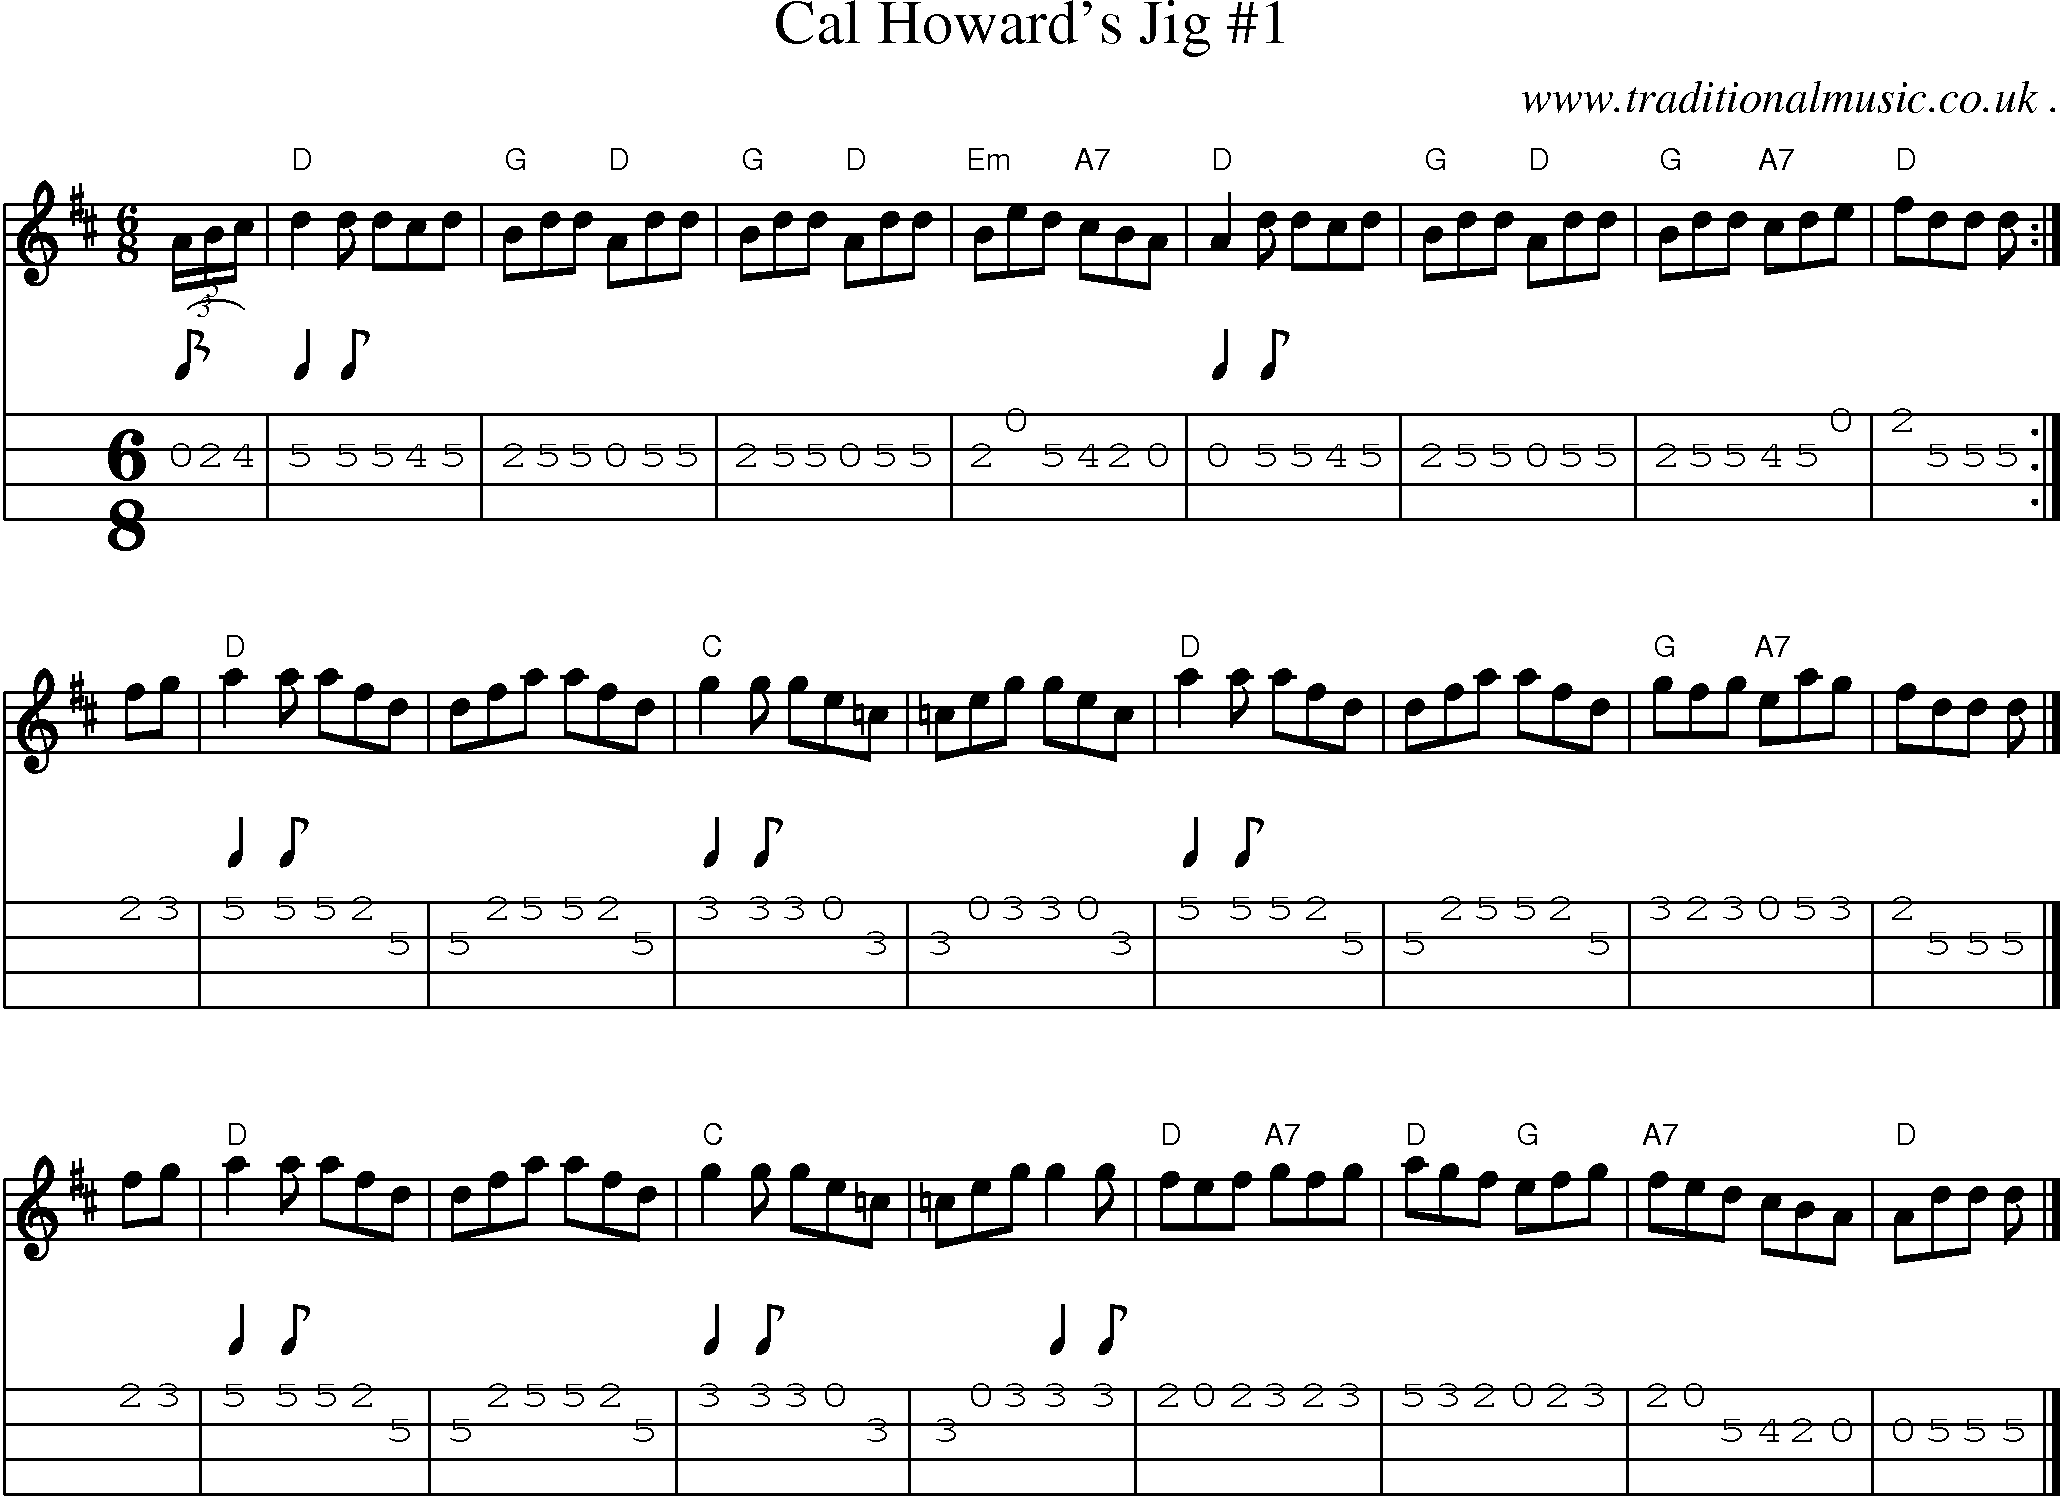 Sheet-music  score, Chords and Mandolin Tabs for Cal Howards Jig 1